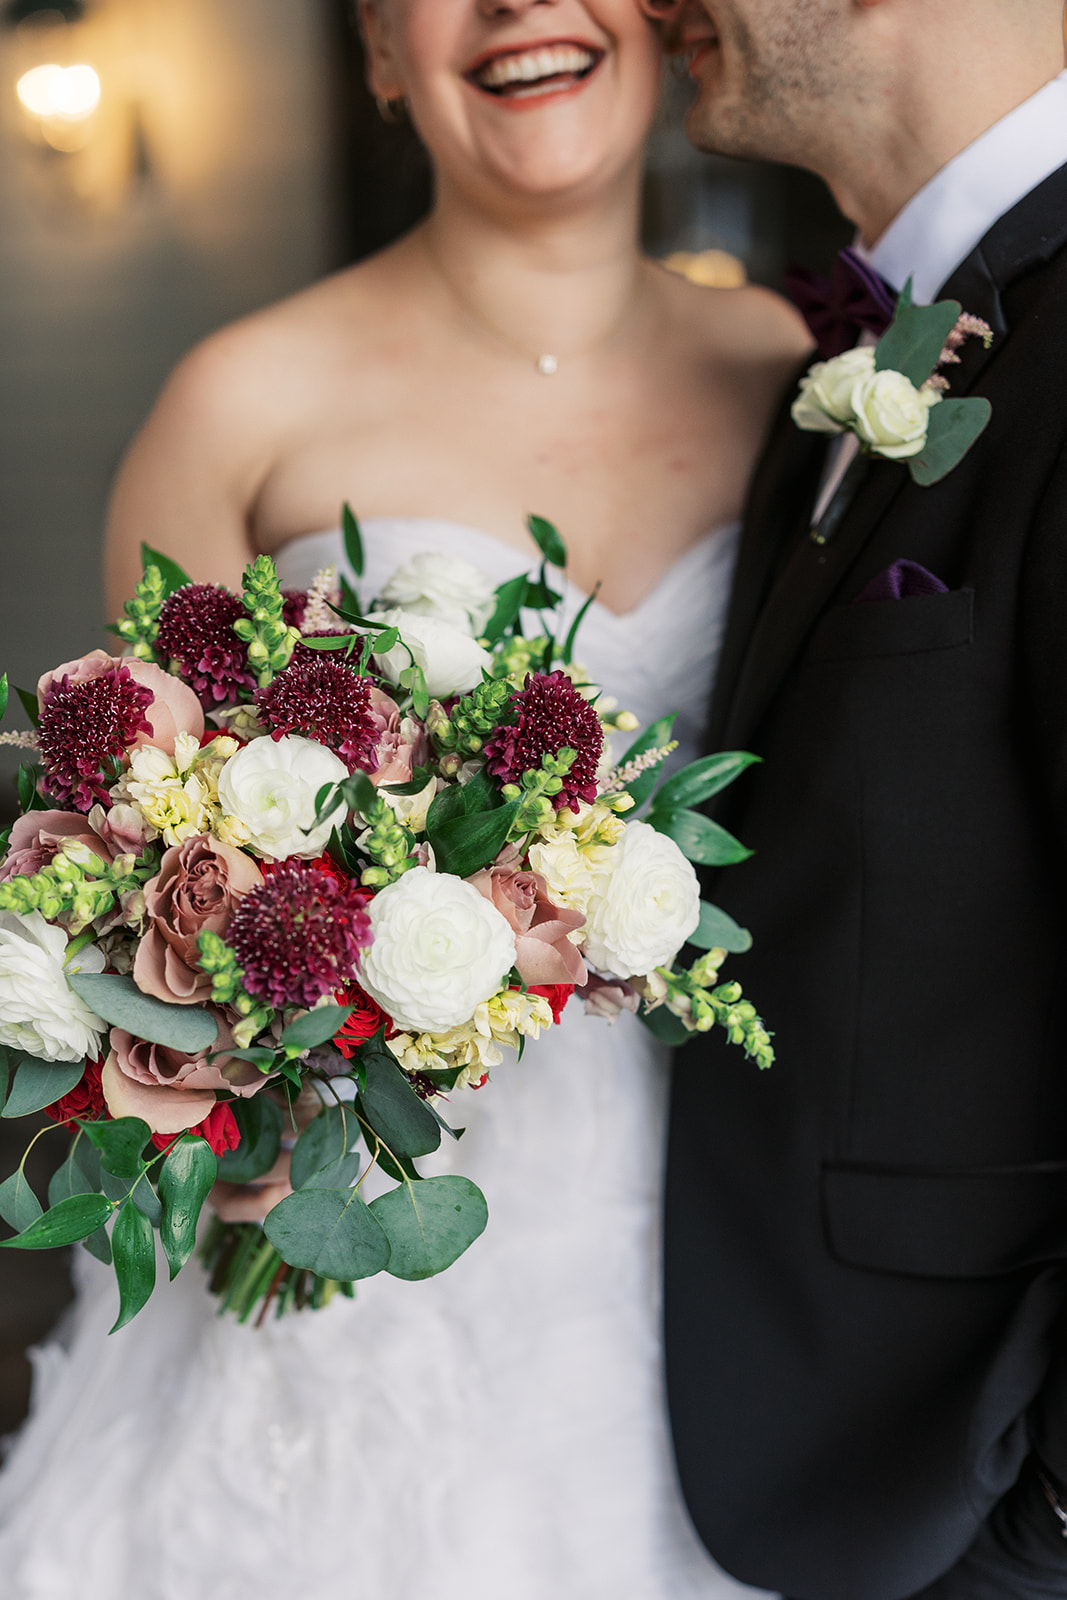 Details of a bridal bouquet with purple, pink and white flowers